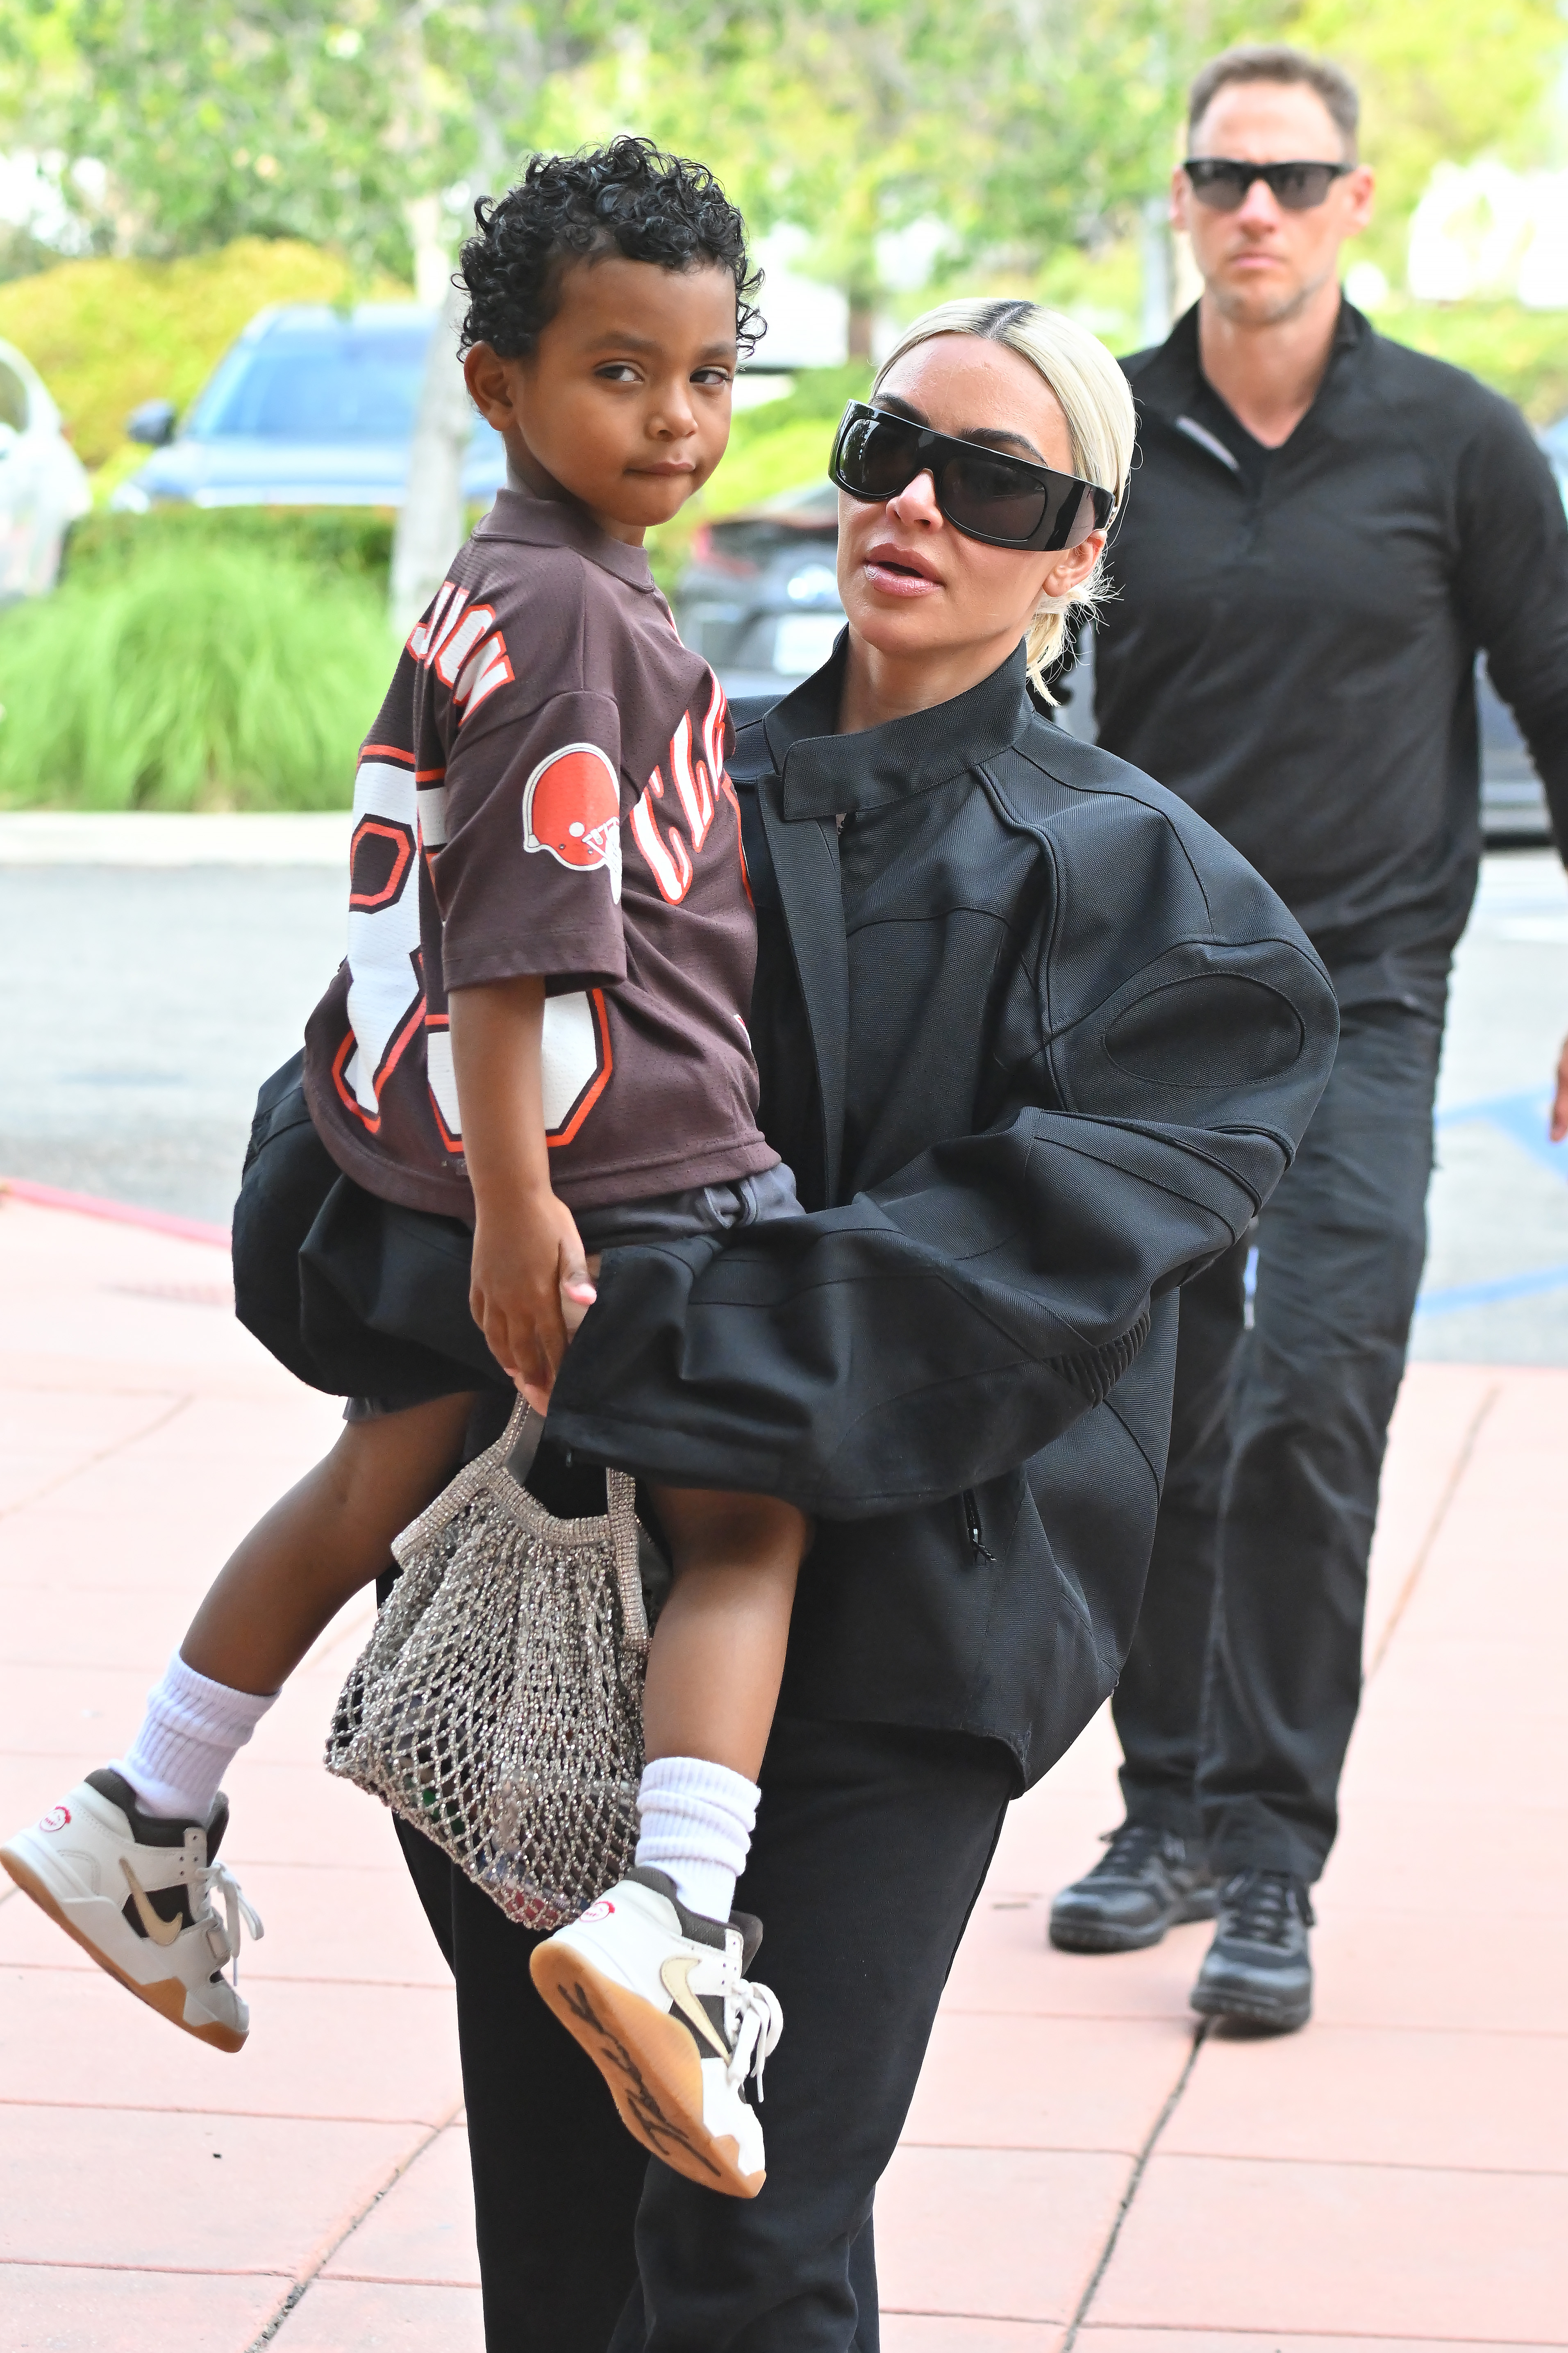 The recent photos were from Friday when her son Psalm and her attended her oldest son, Saint's, basketball game